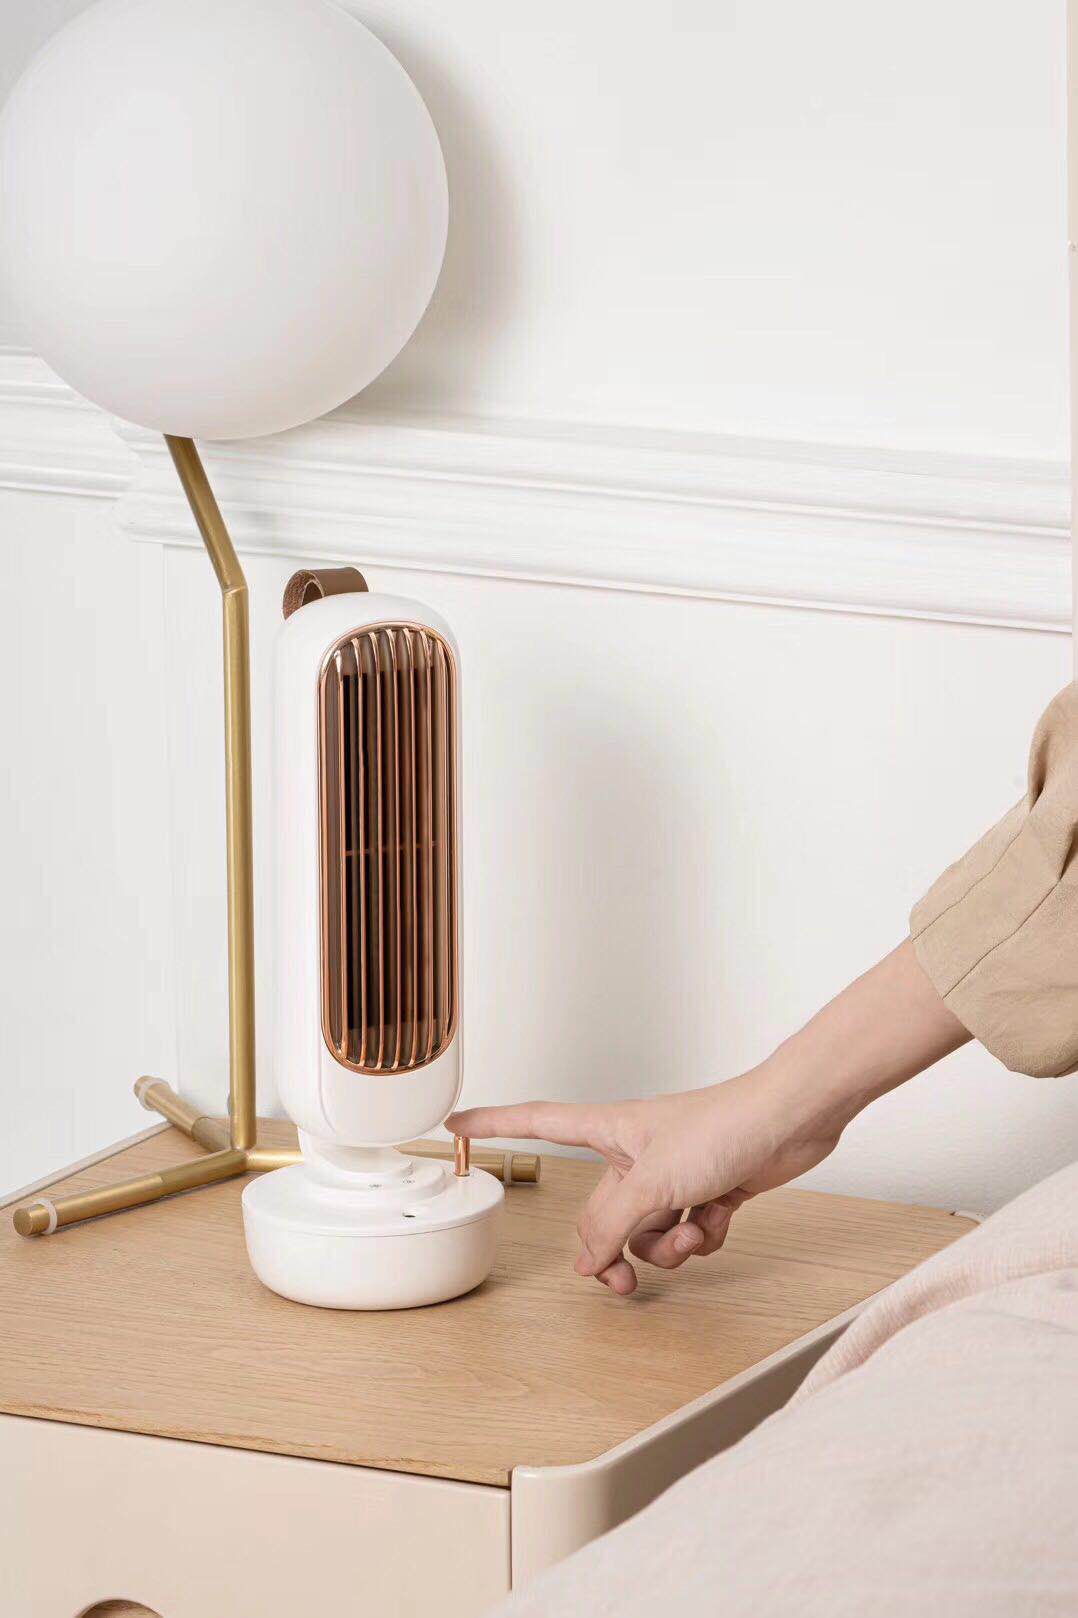 Electric Mute Tower Fan With Humidifier